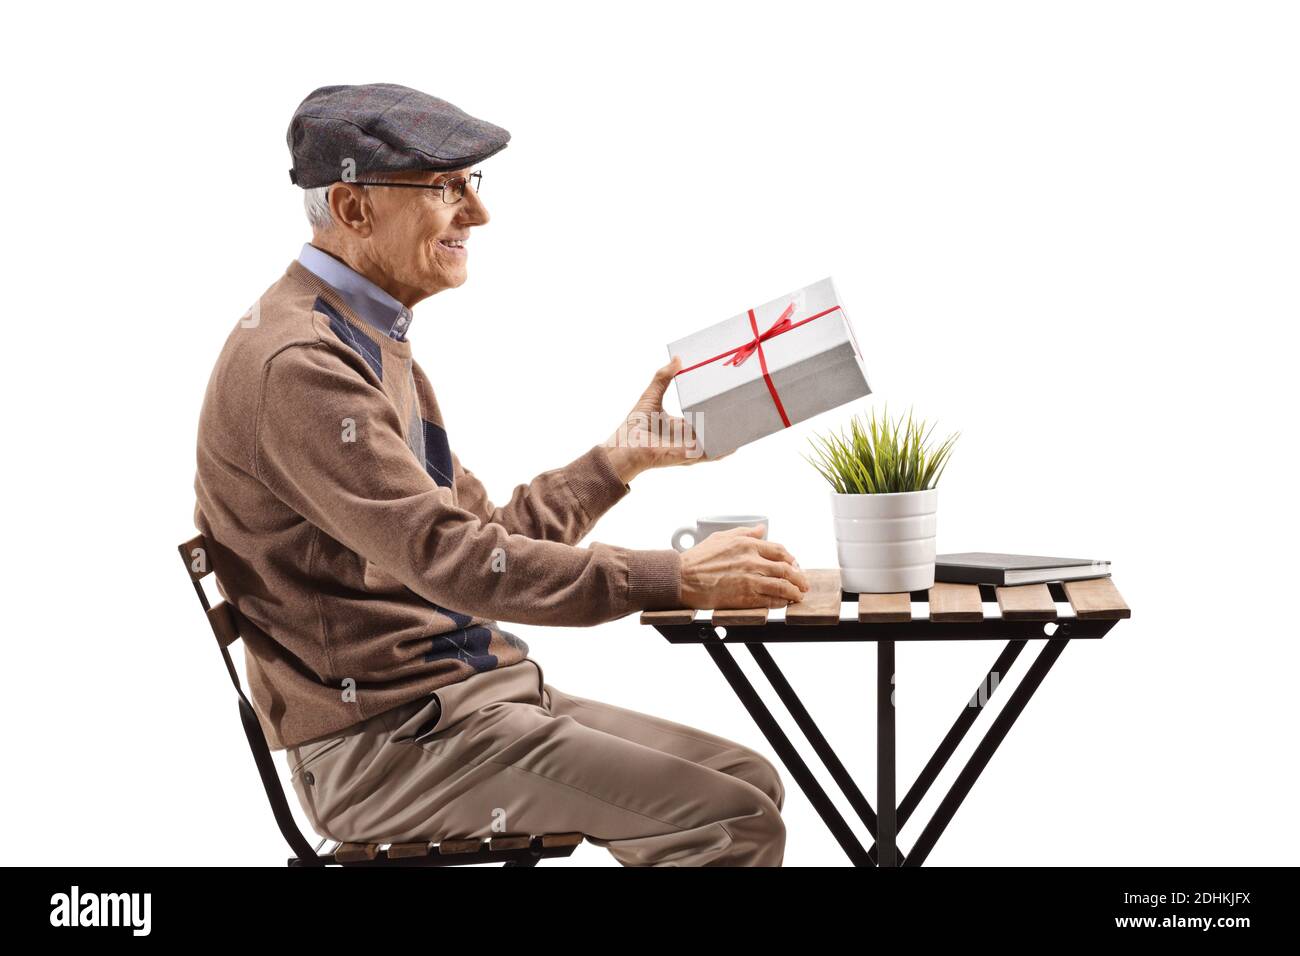 Elderly man sitting at a cafe and holding a present isolated on white background Stock Photo